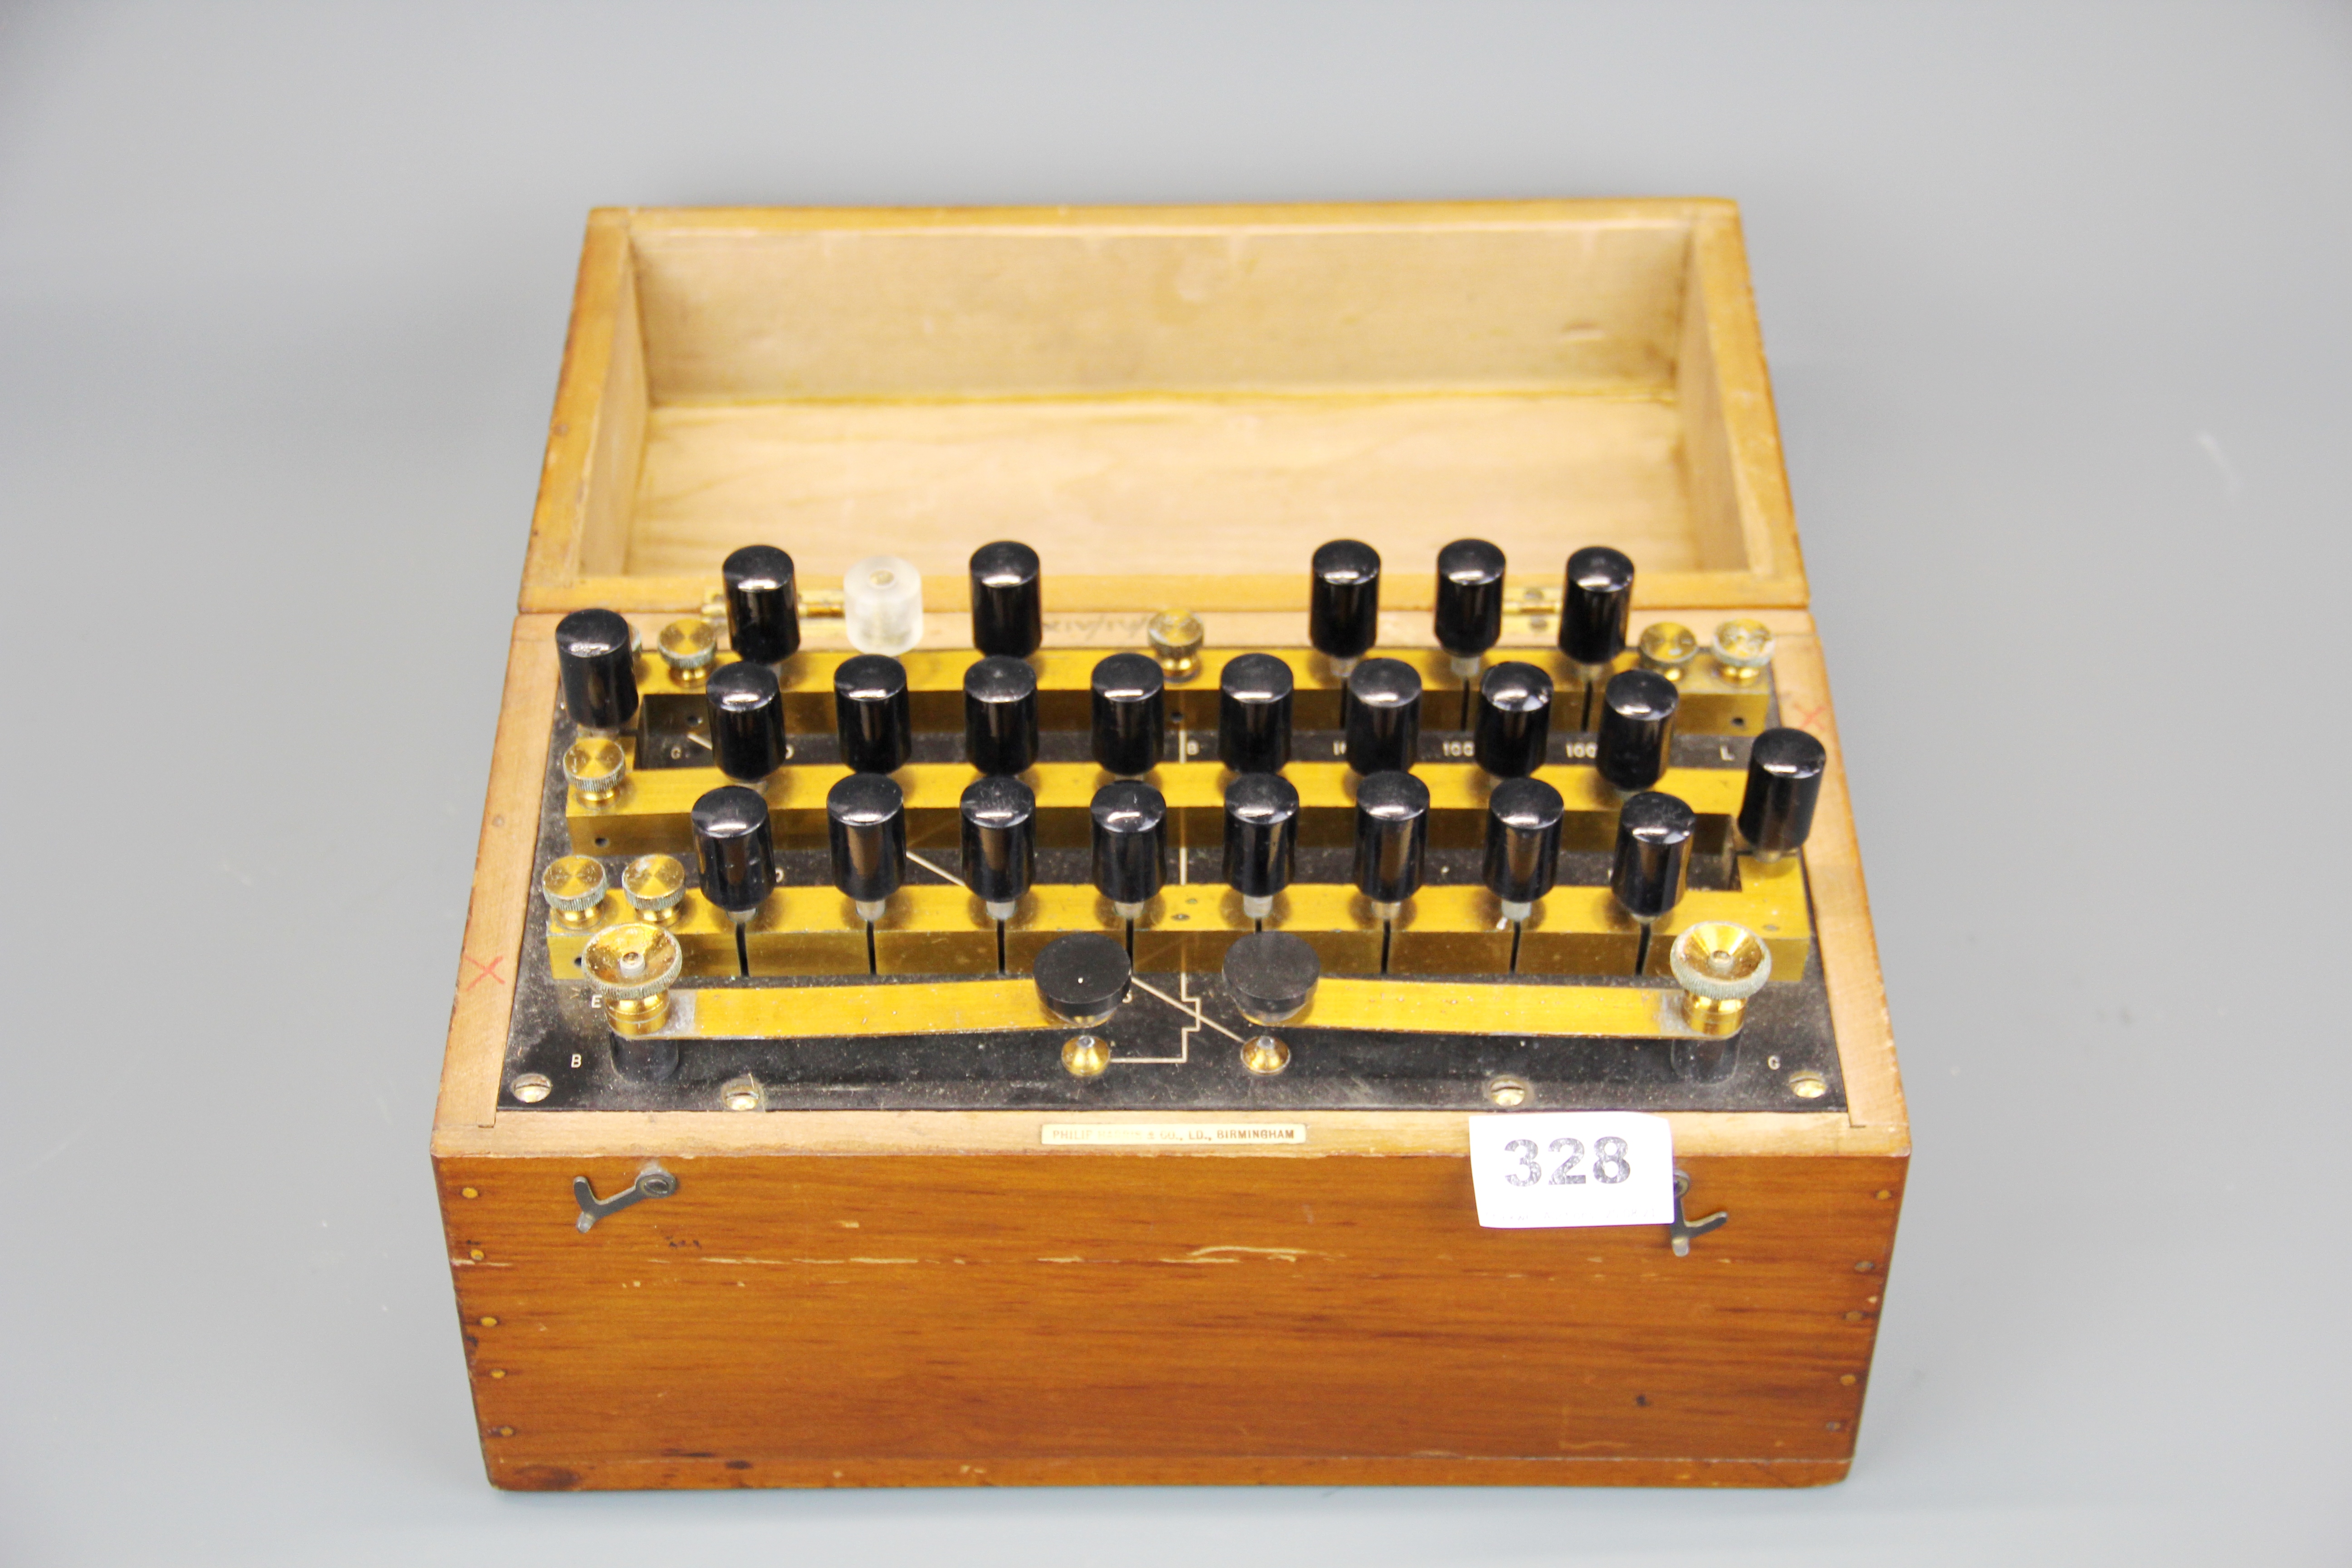 A mahogany cased Phillip Harris and Co electrical resistance box, 28 x 15 x 17cm.